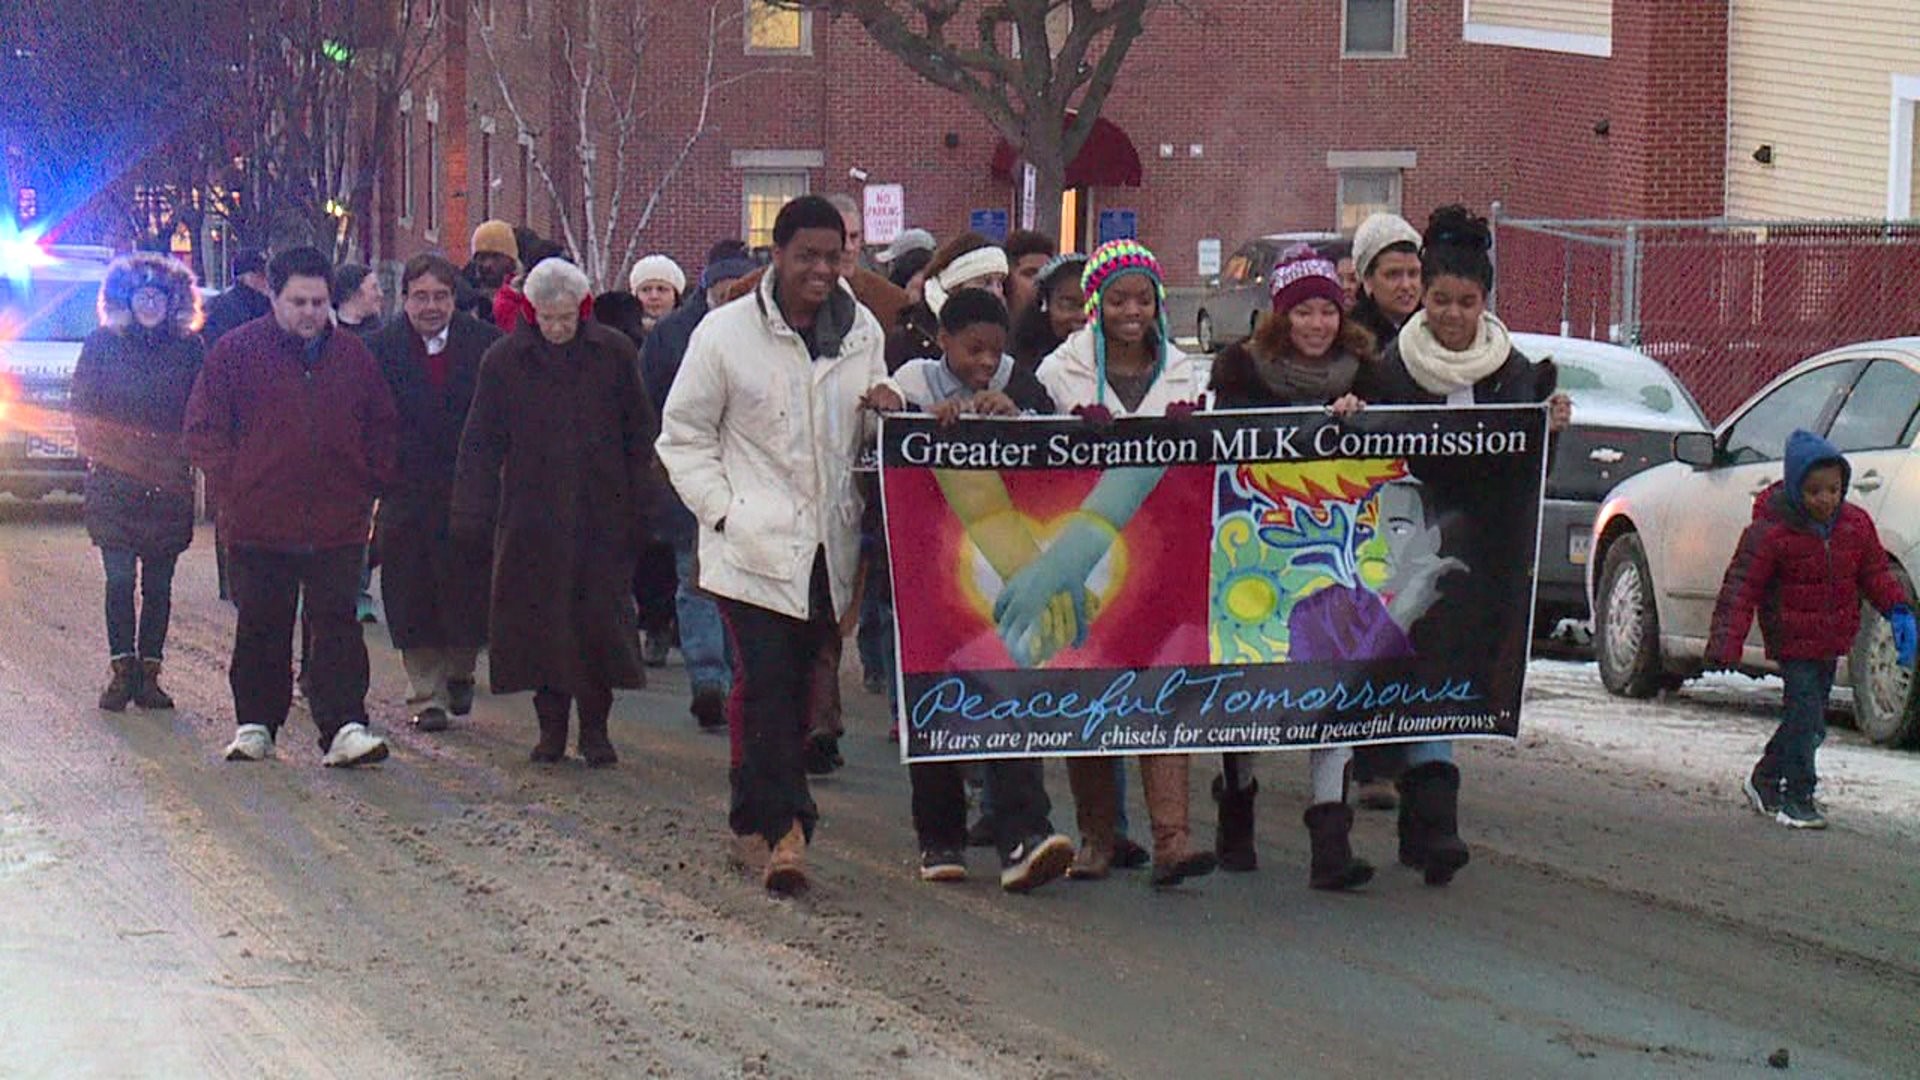 Marching in Scranton in Remembrance of Martin Luther King Jr.